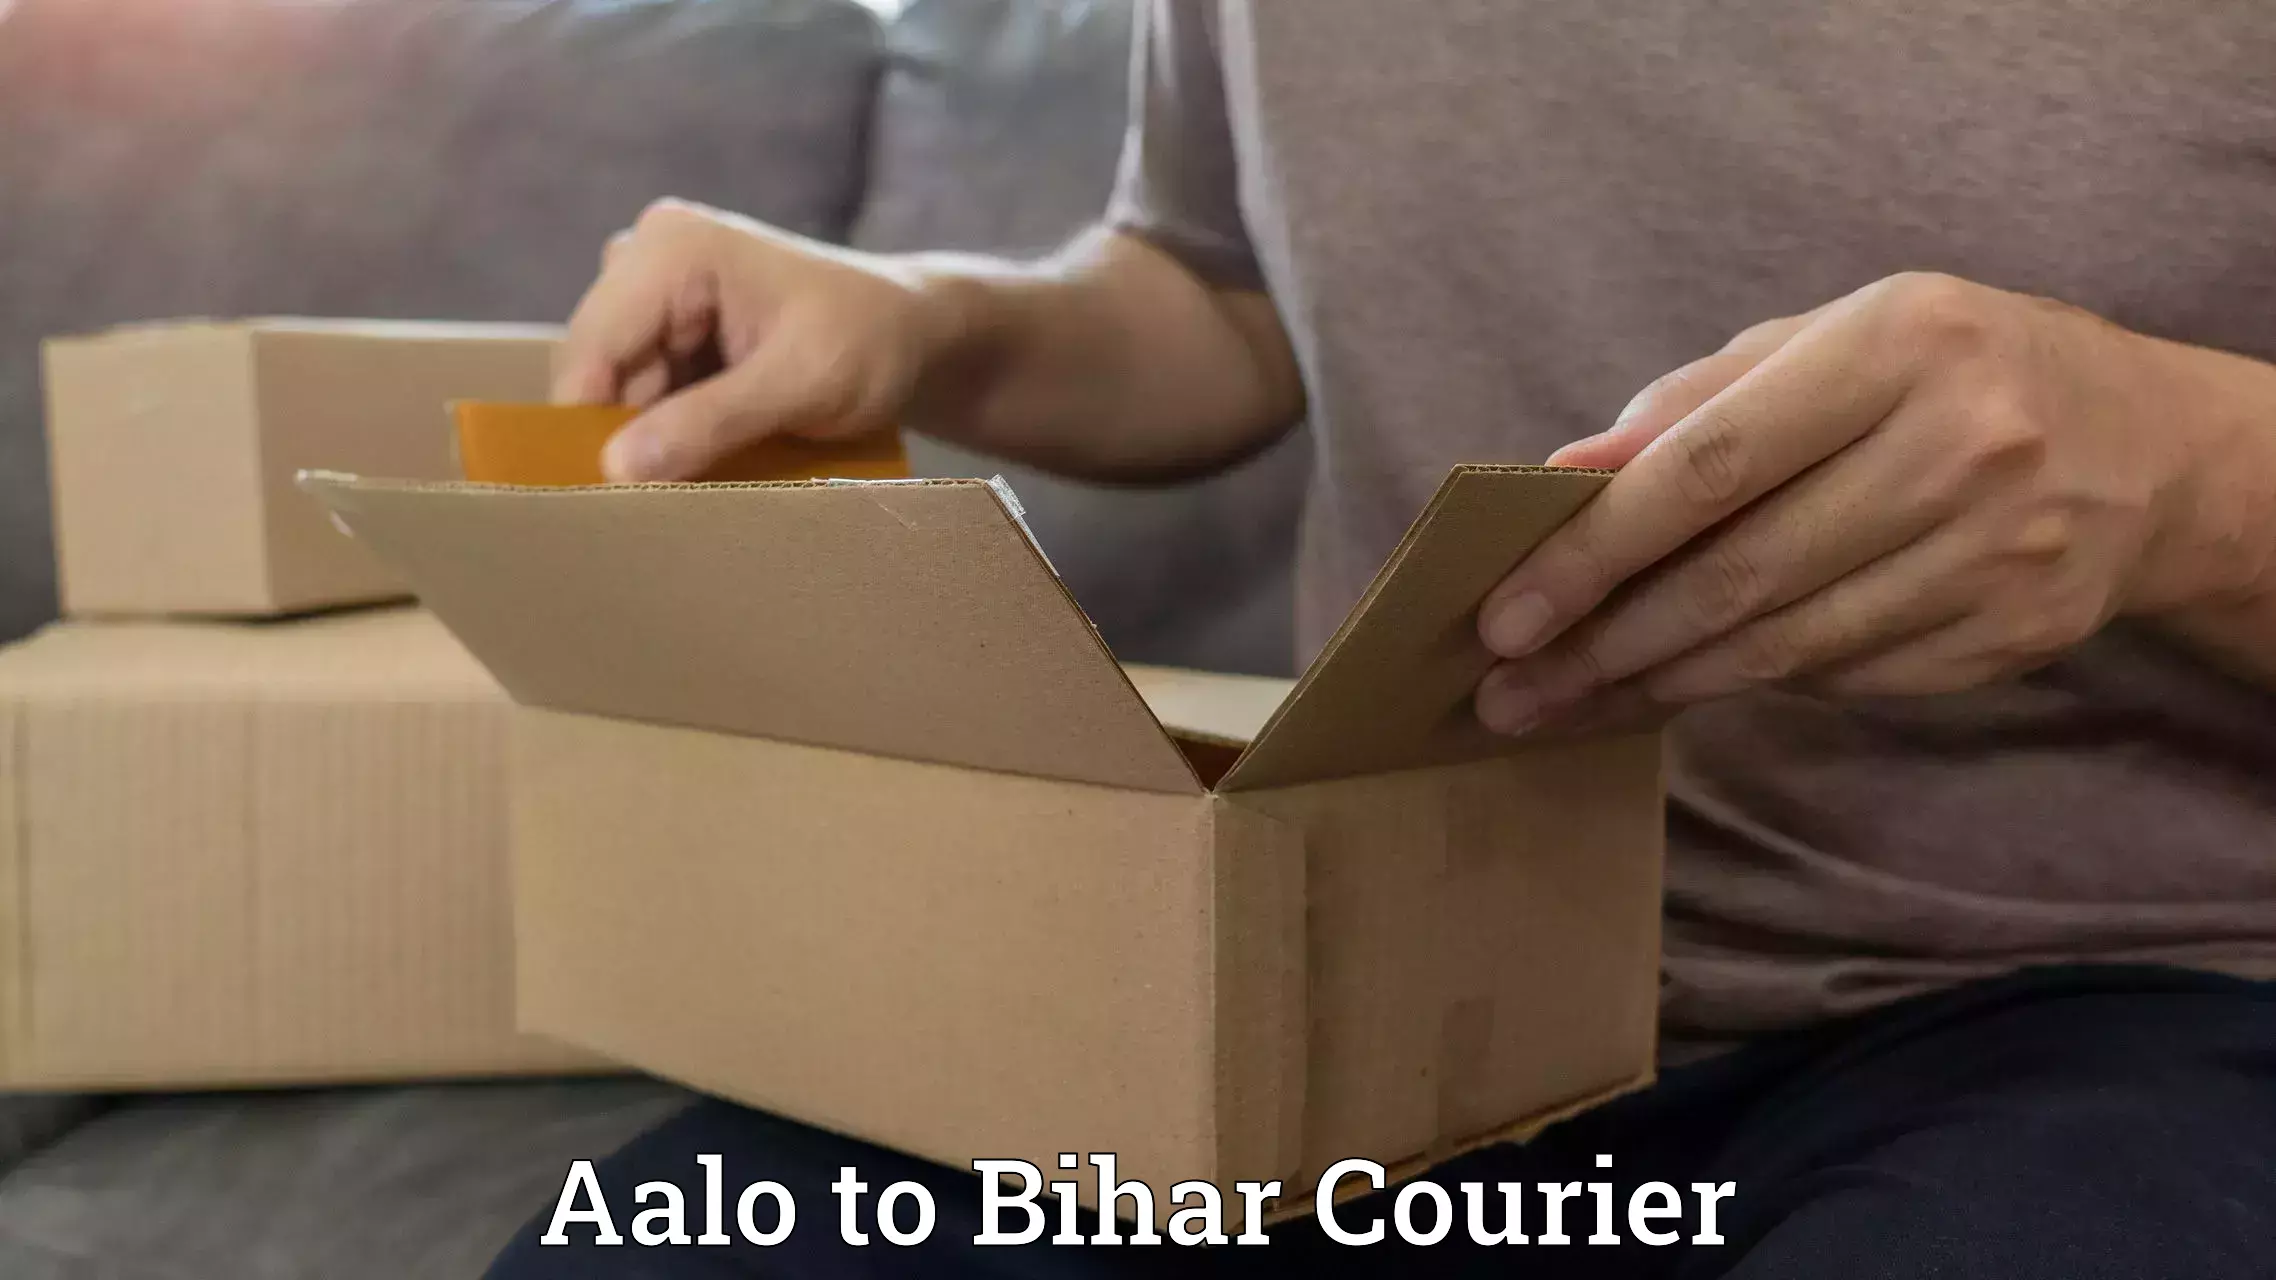 International courier networks Aalo to Piro